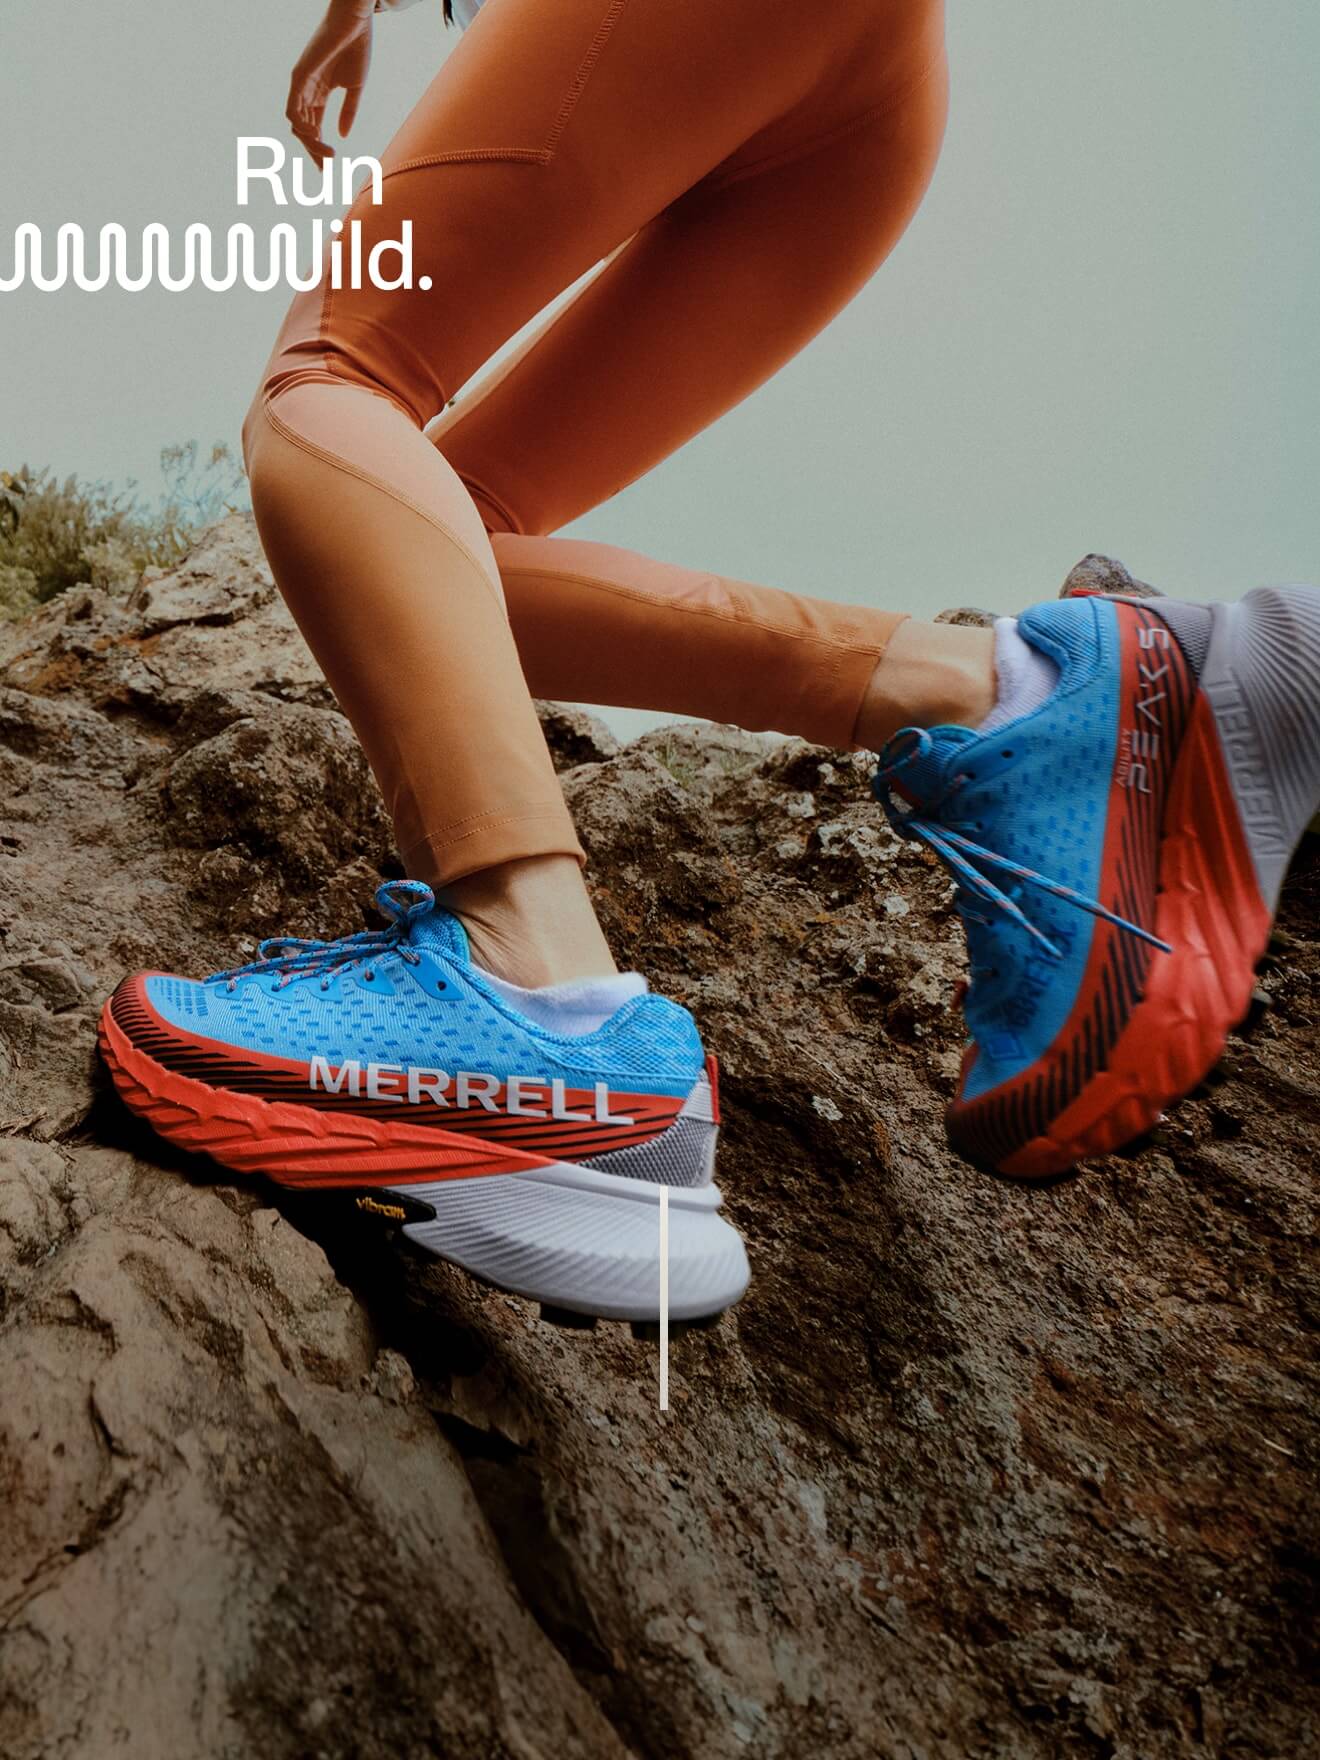 The Running Collective  La gamme de chaussures Nike Running